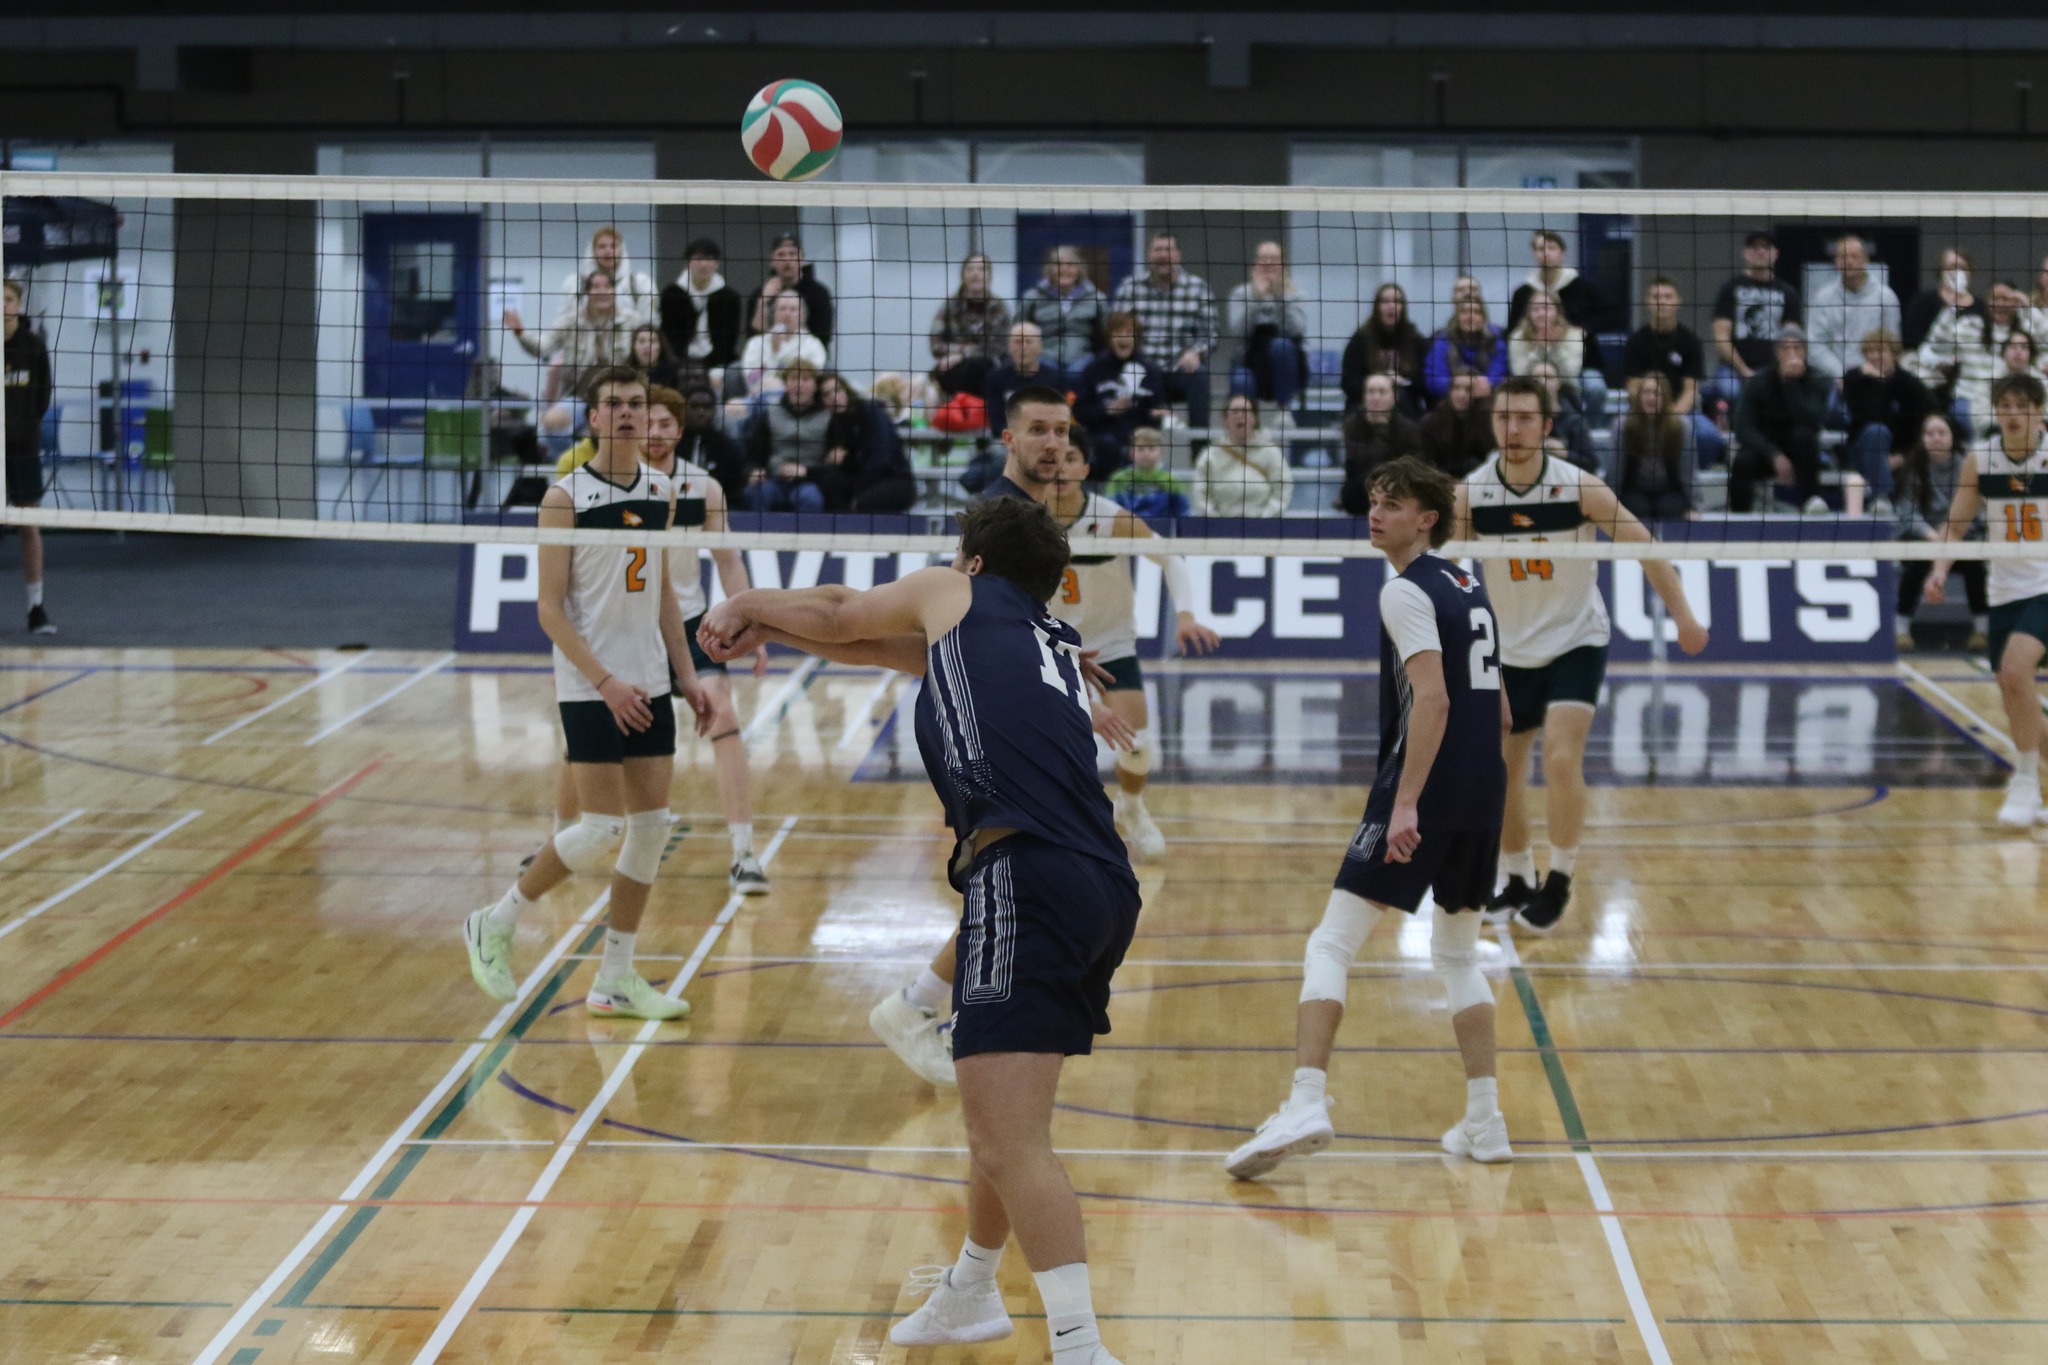 The CCAA selects Providence University College as host of the 2025 CCAA Men’s Volleyball Championship.